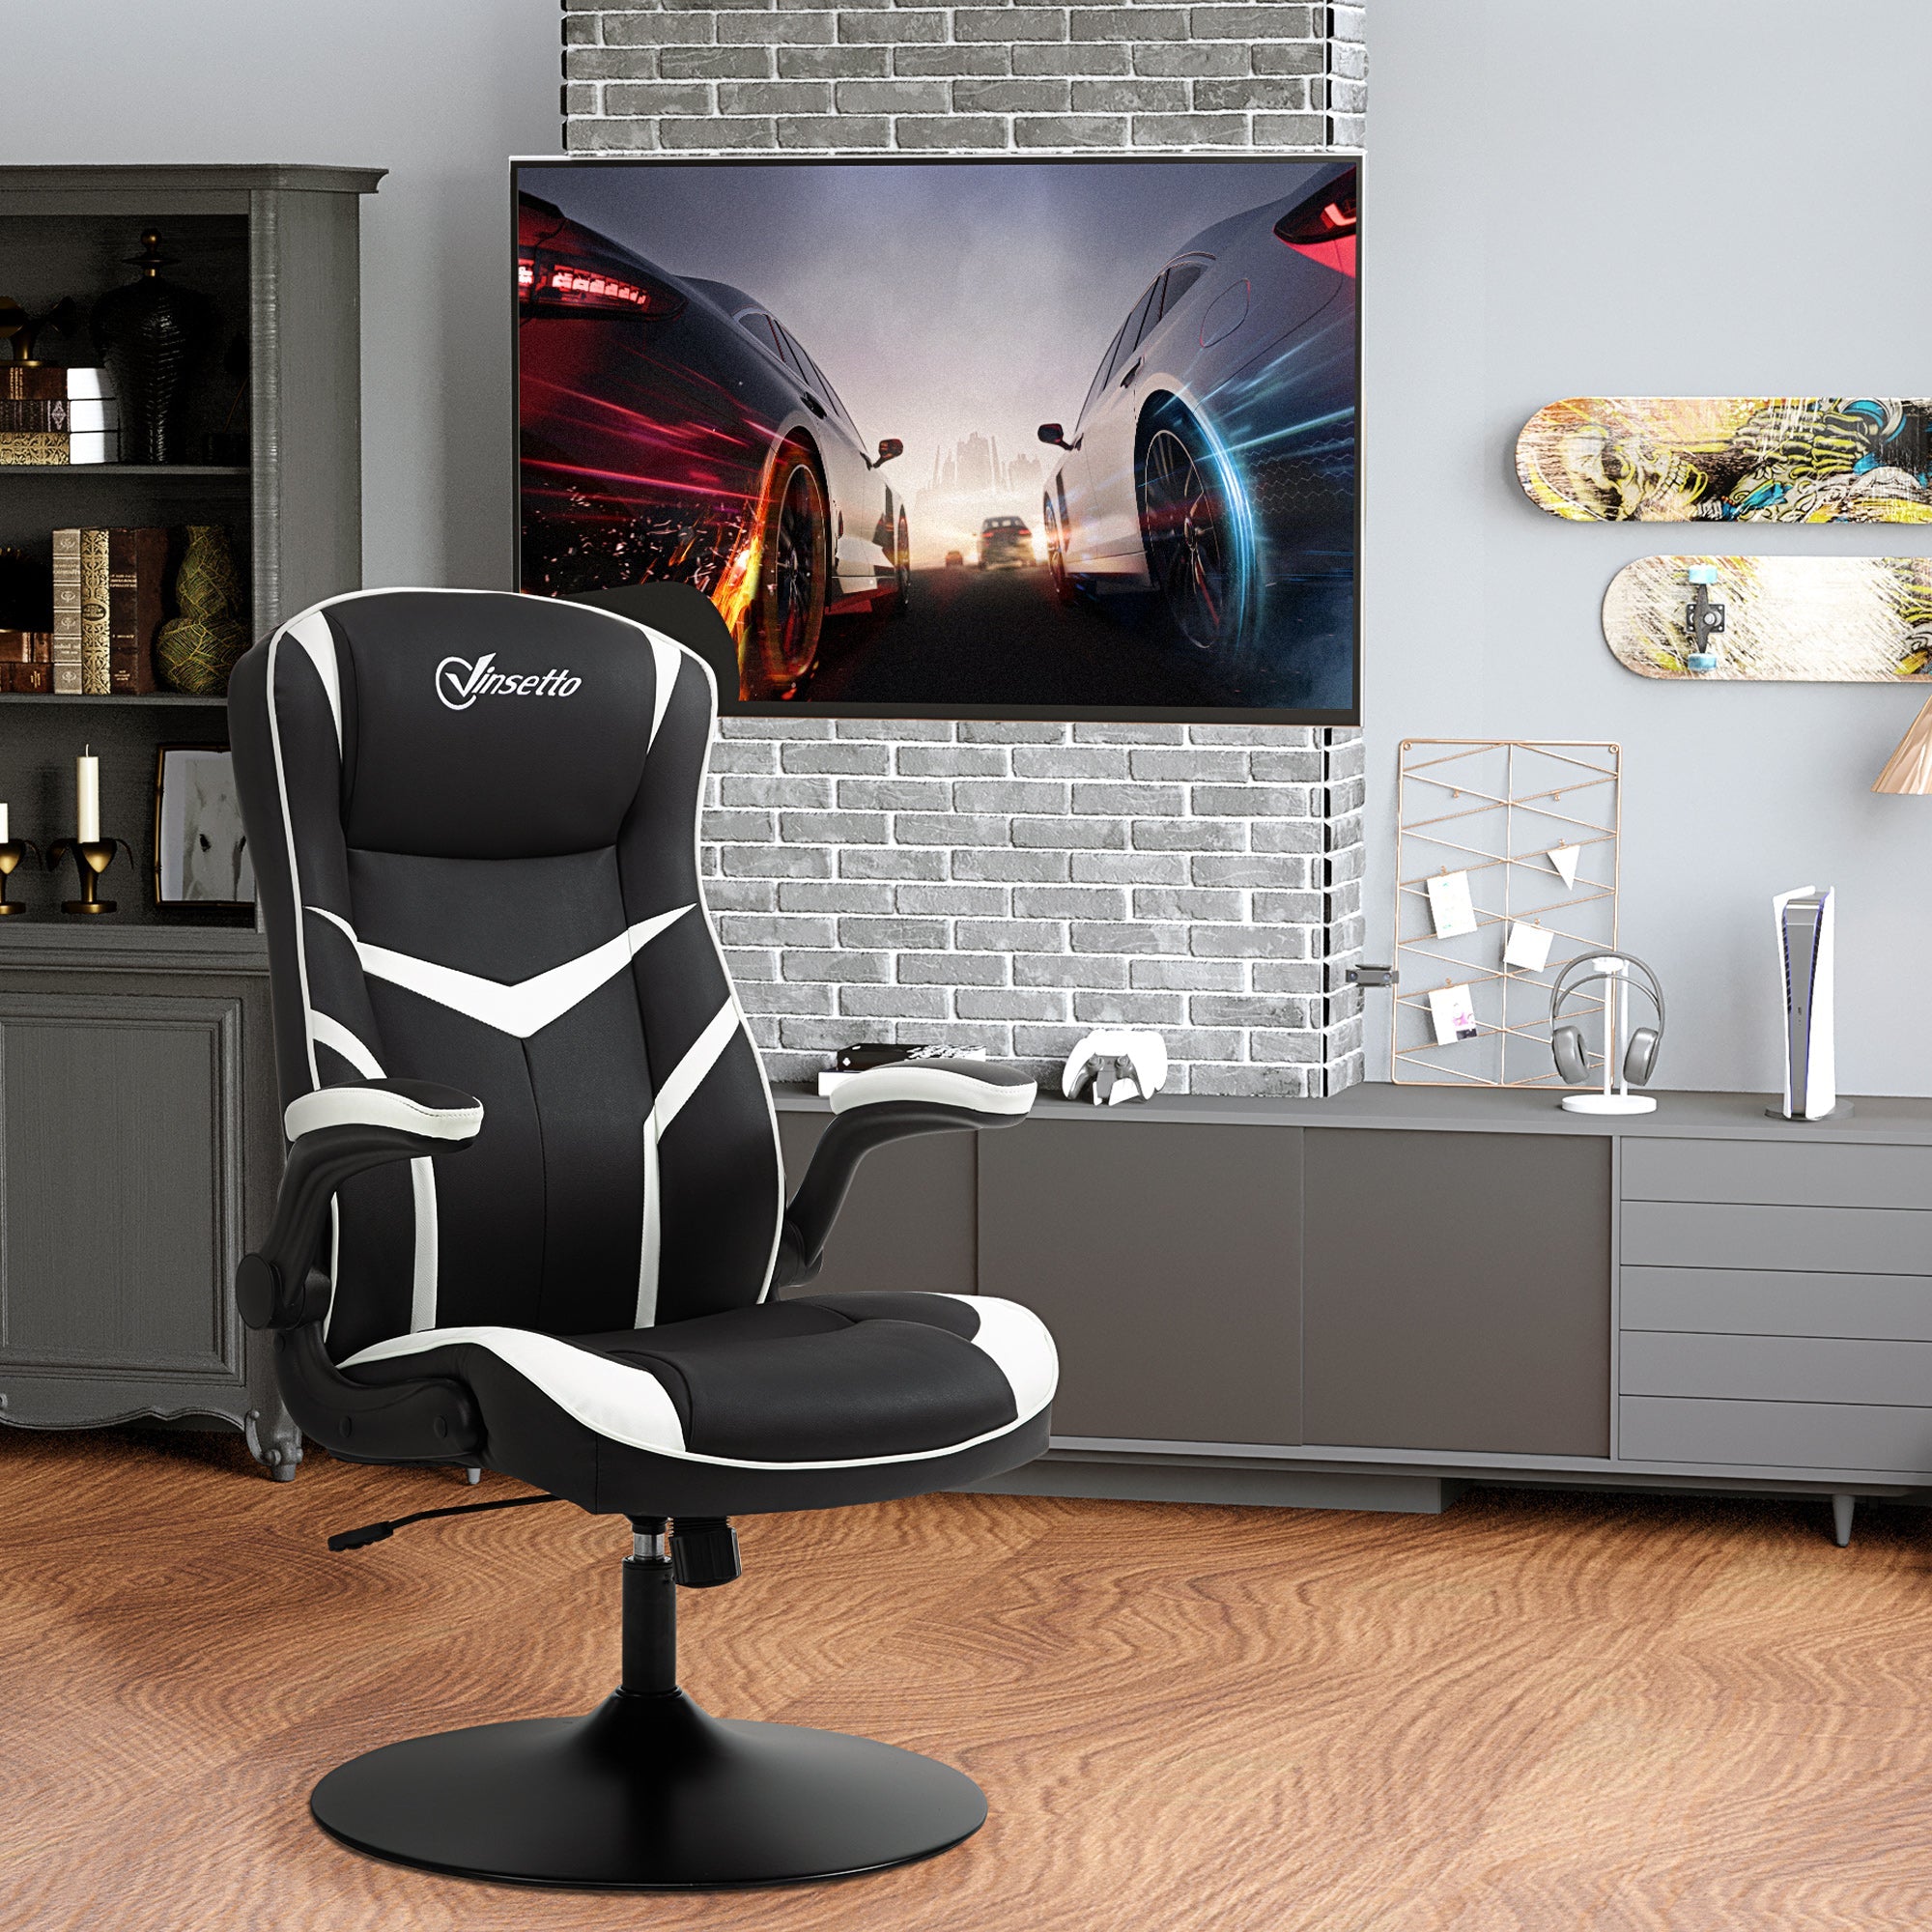 Gaming Chair Ergonomic Computer Chair Home Office Desk Swivel Chair w/ Adjustable Height Pedestal Base PVC Leather, Black & White-1